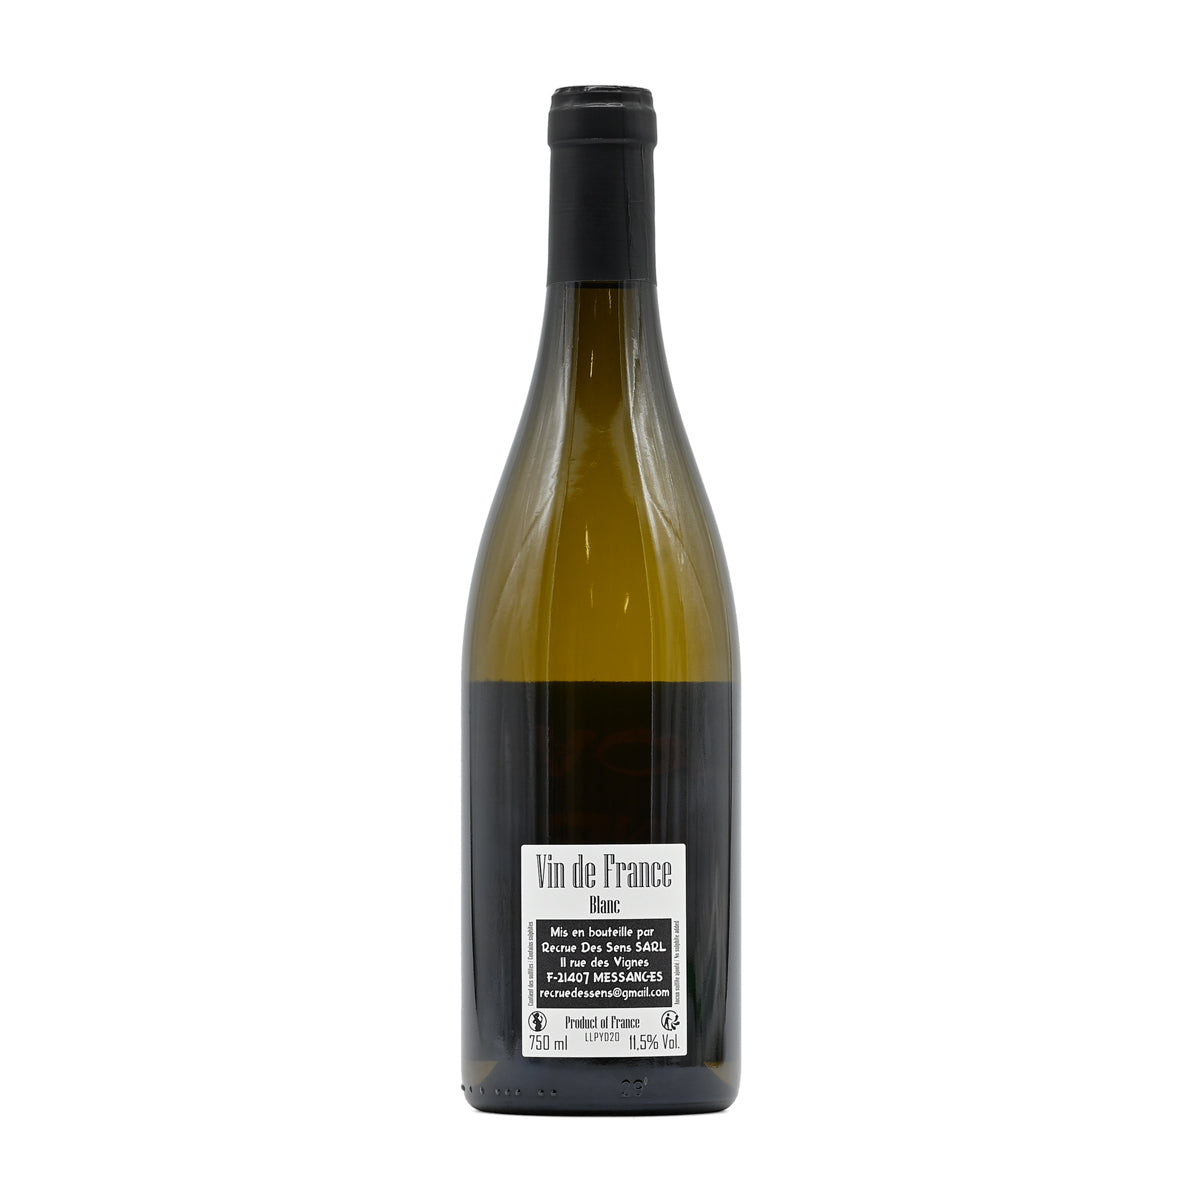 Yann Durieux VDF Love and Pif 2020, 750ml French white wine, made from Aligote; Vin de France, from Recrue Des Sens, Burgundy, France – GDV Fine Wines, Hong Kong